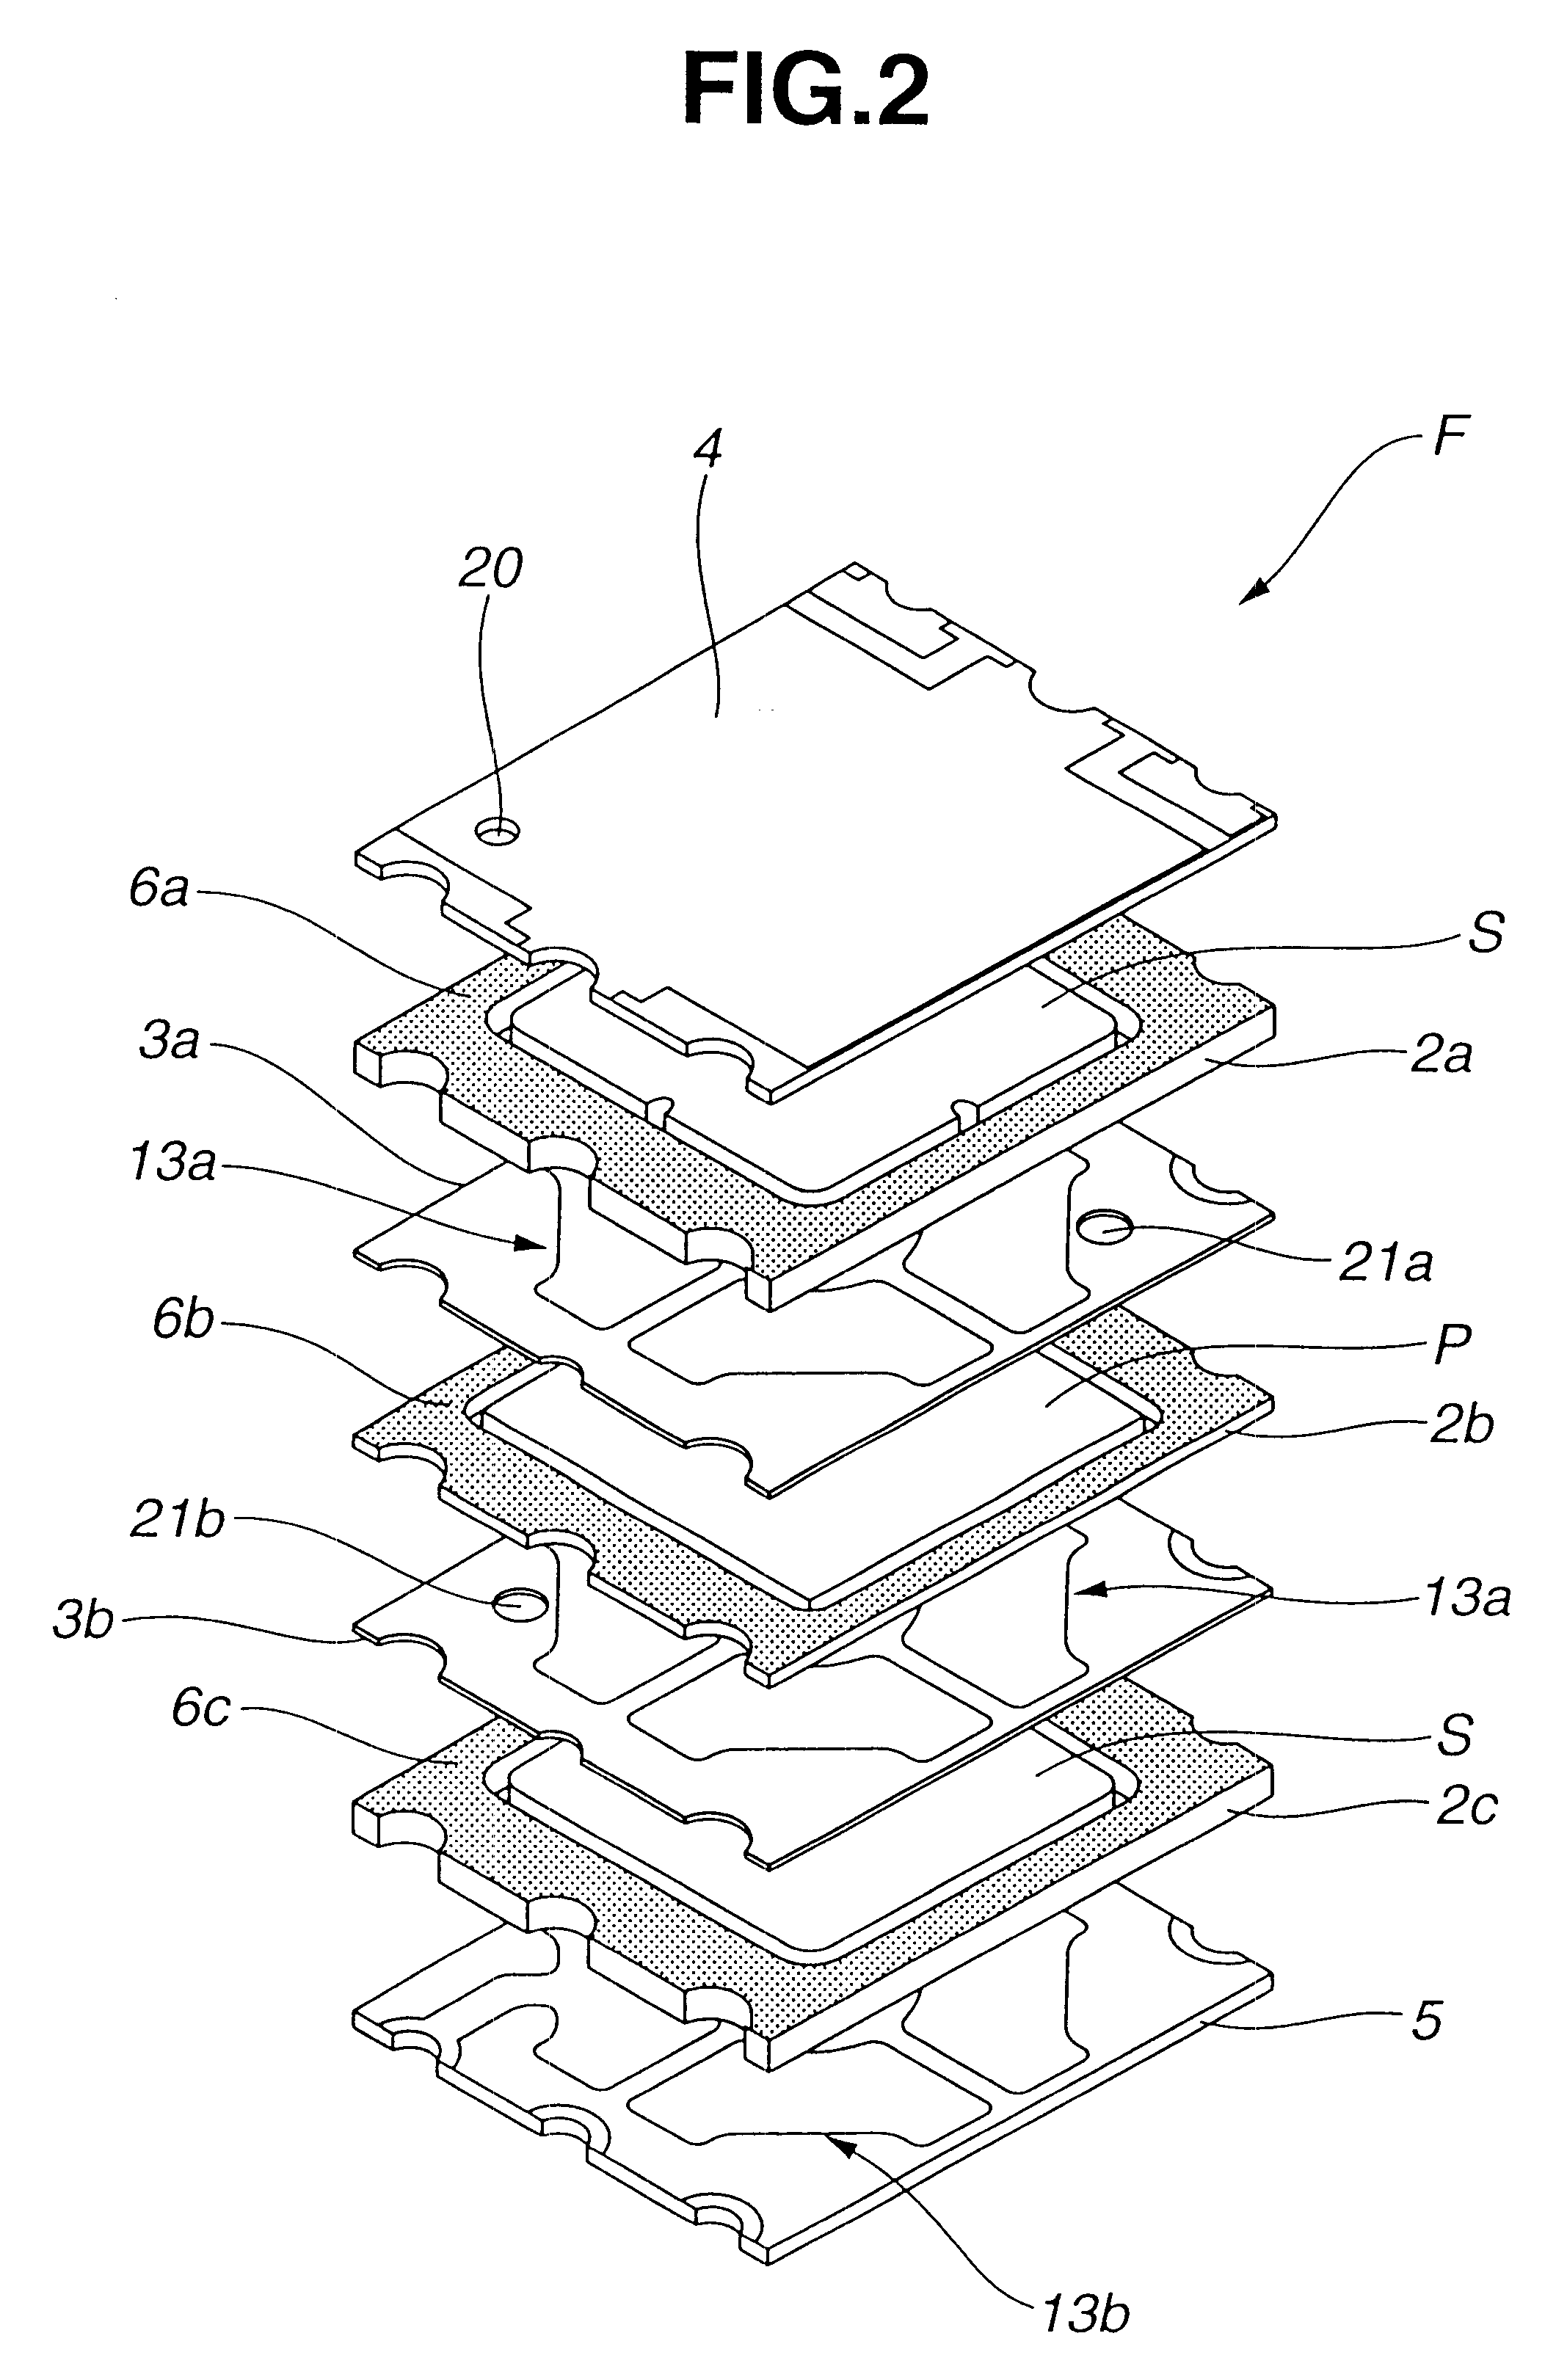 Multilayer piezoelectric filter with an air vent between two resonator chambers